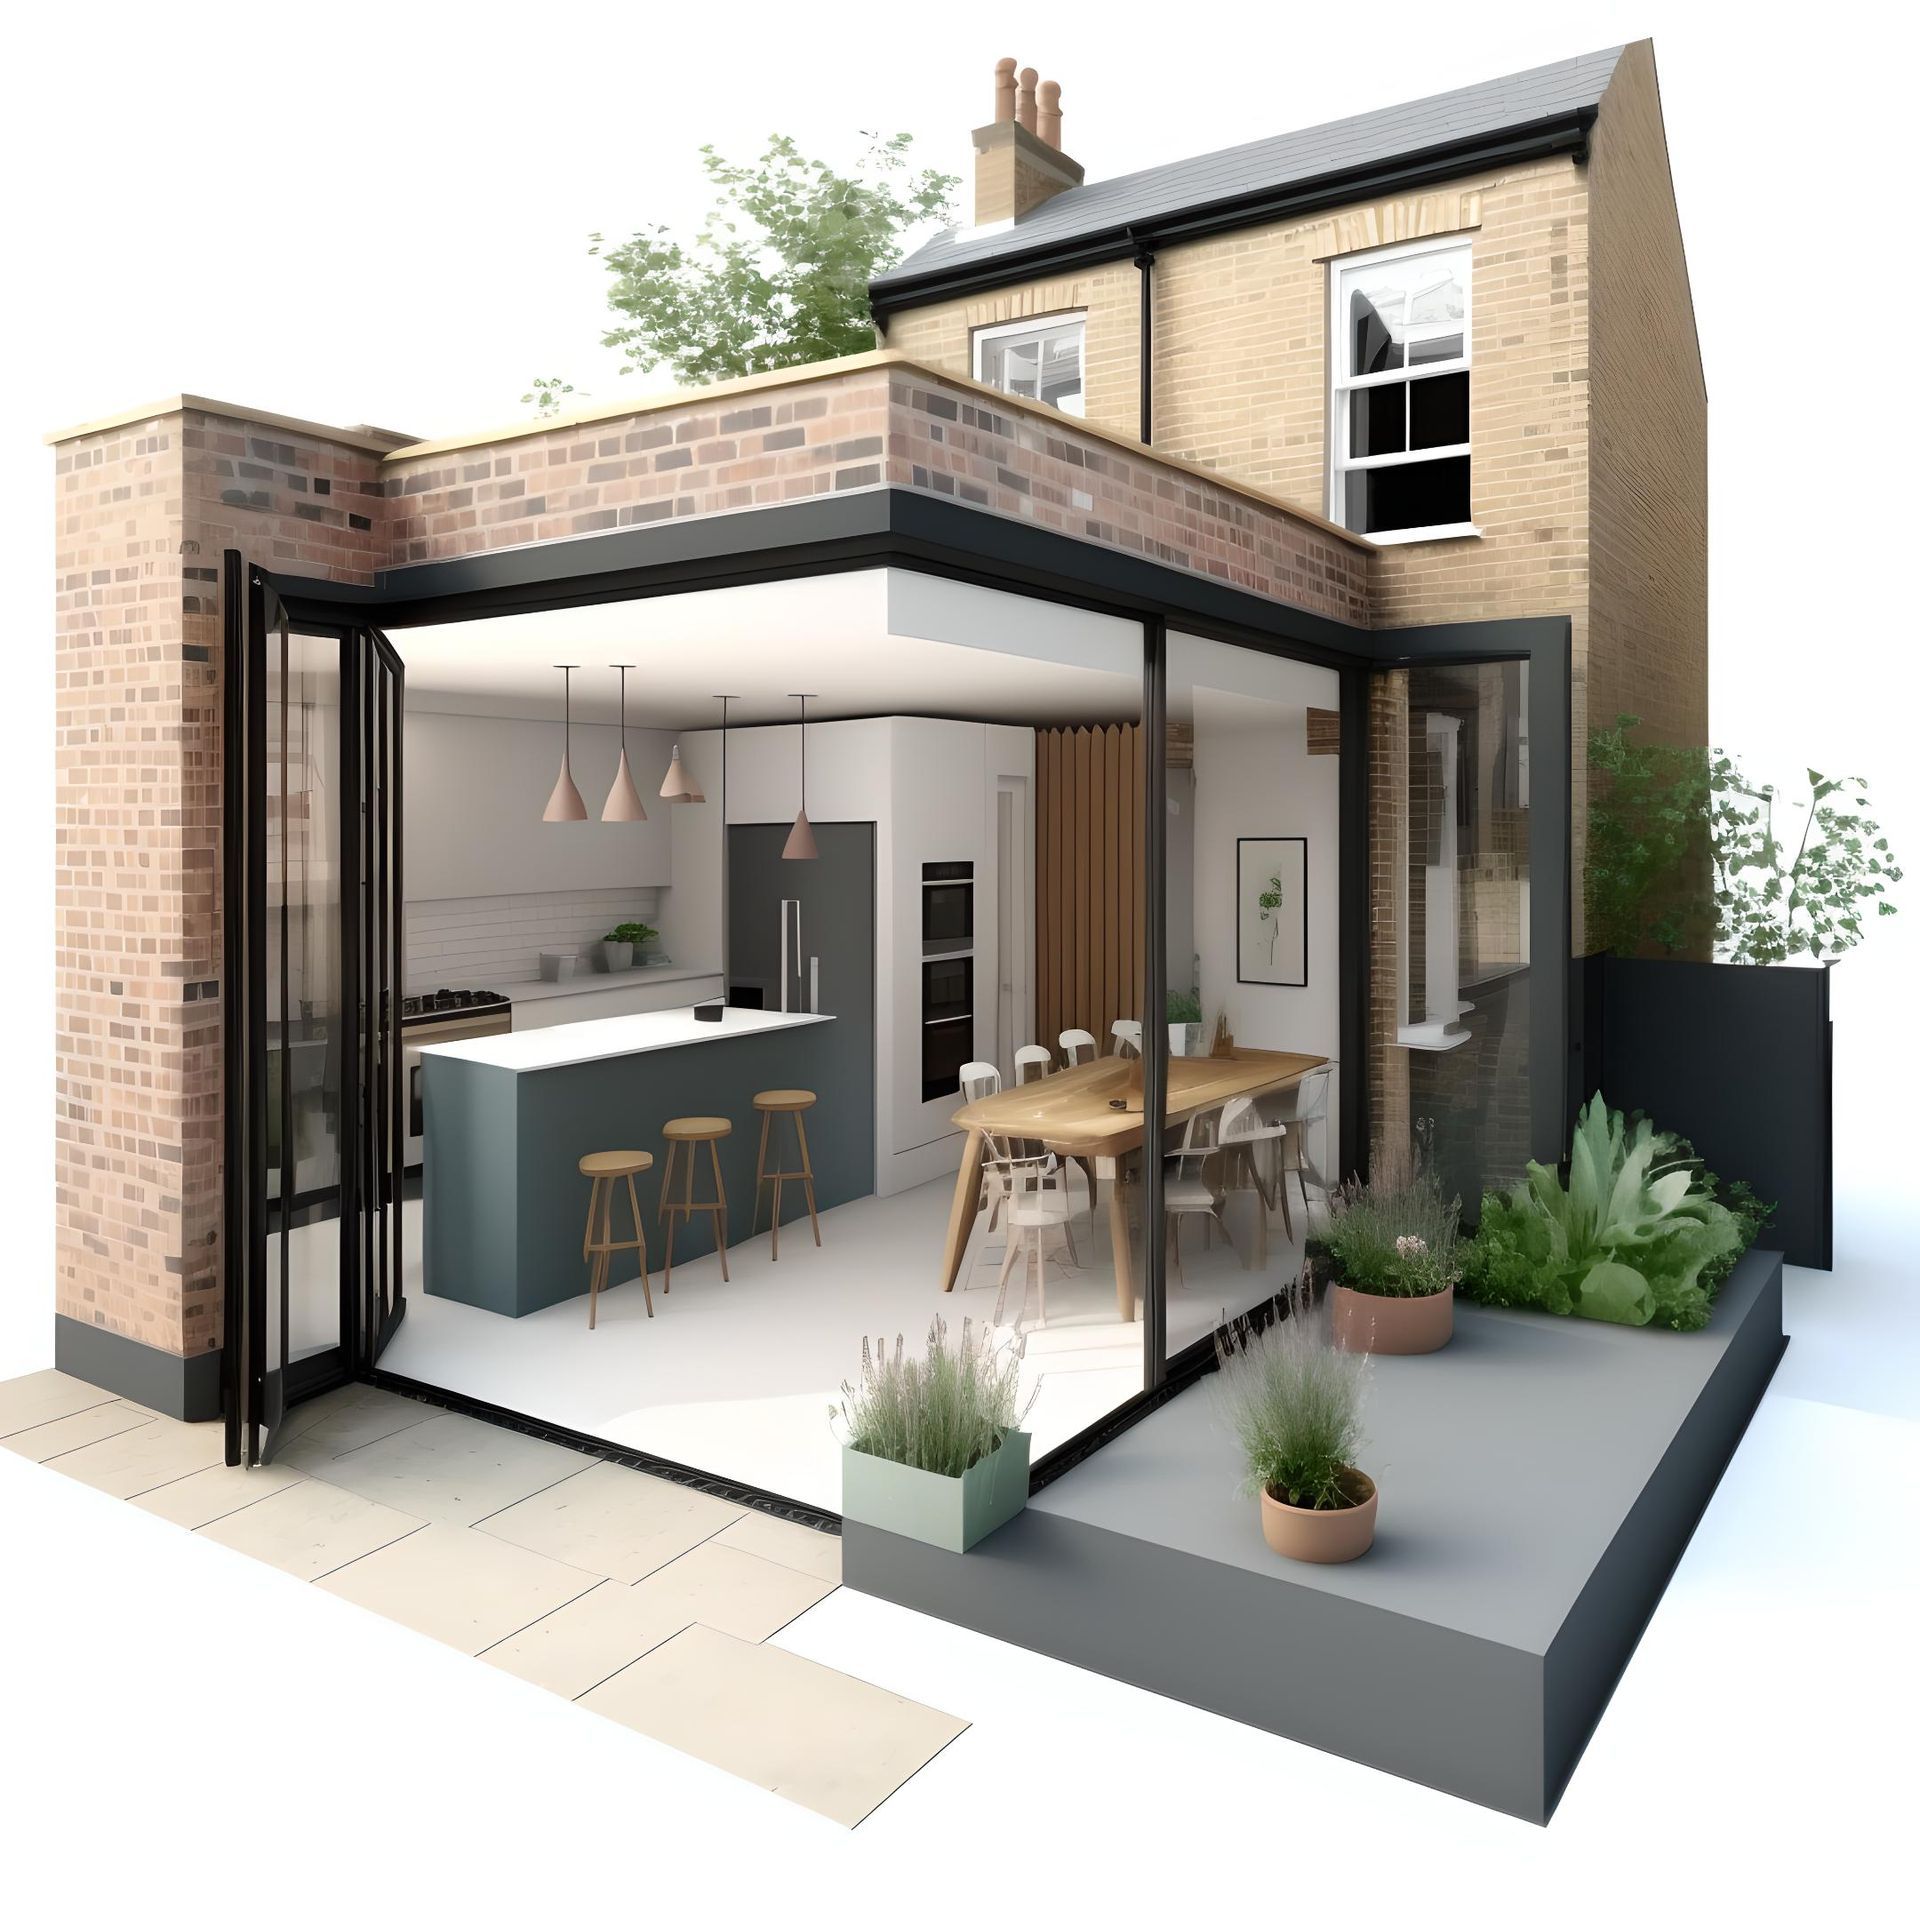 Design concept of modern side return extension with bi-fold doors & material/style options.